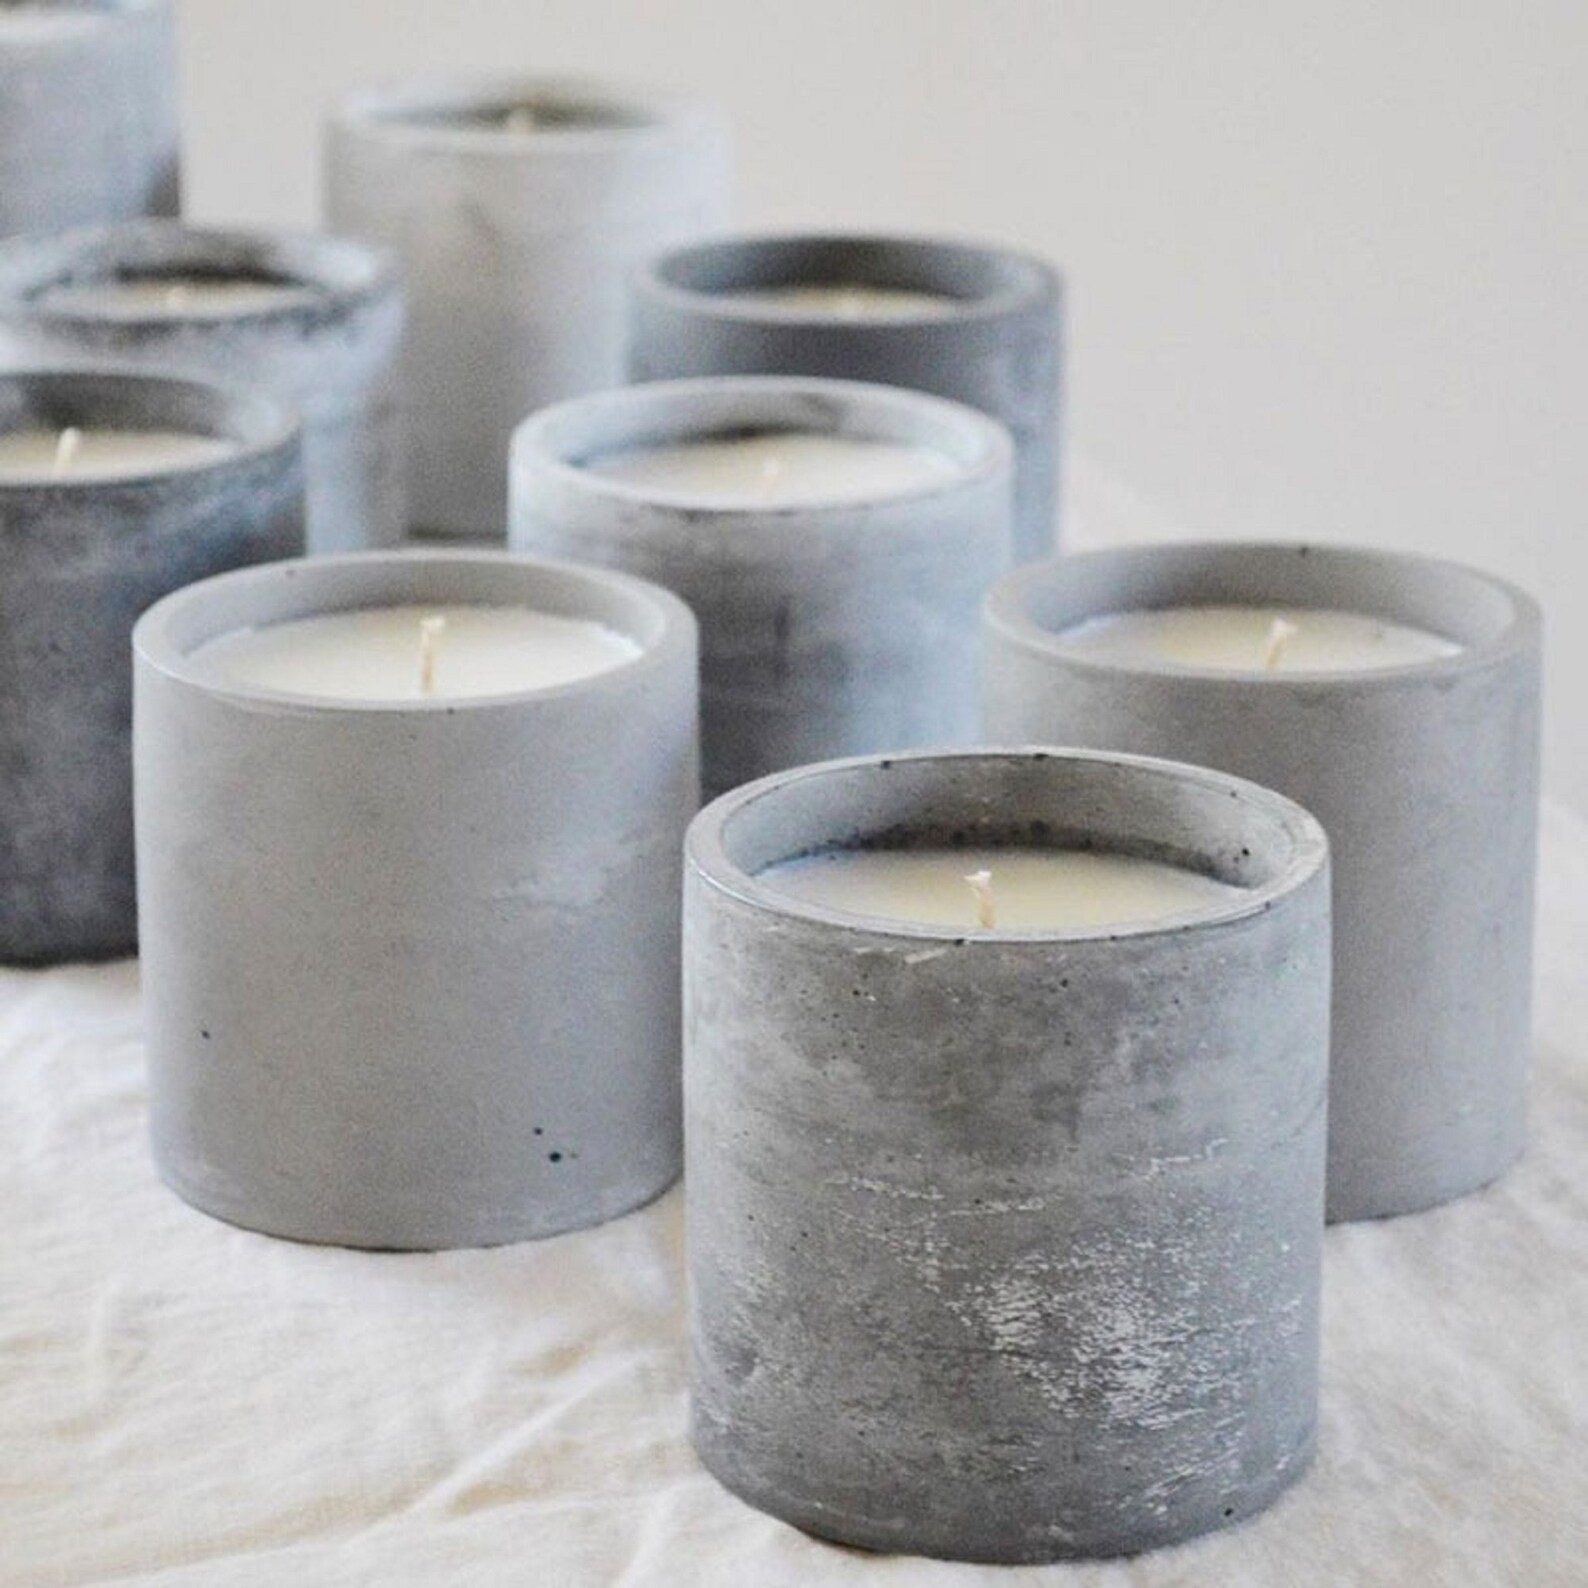 How To Make Concrete Vessels For Candles